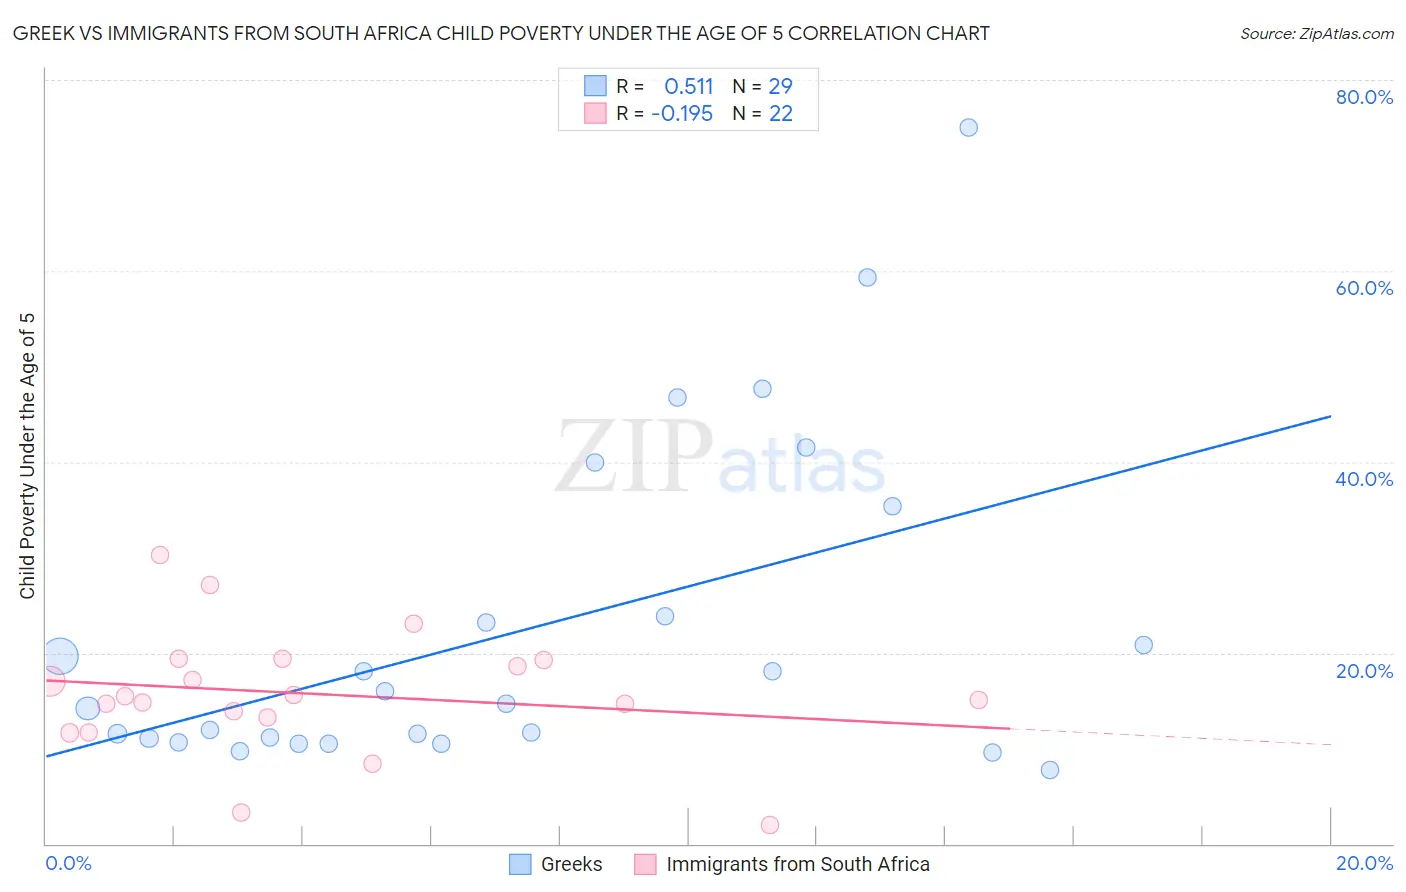 Greek vs Immigrants from South Africa Child Poverty Under the Age of 5